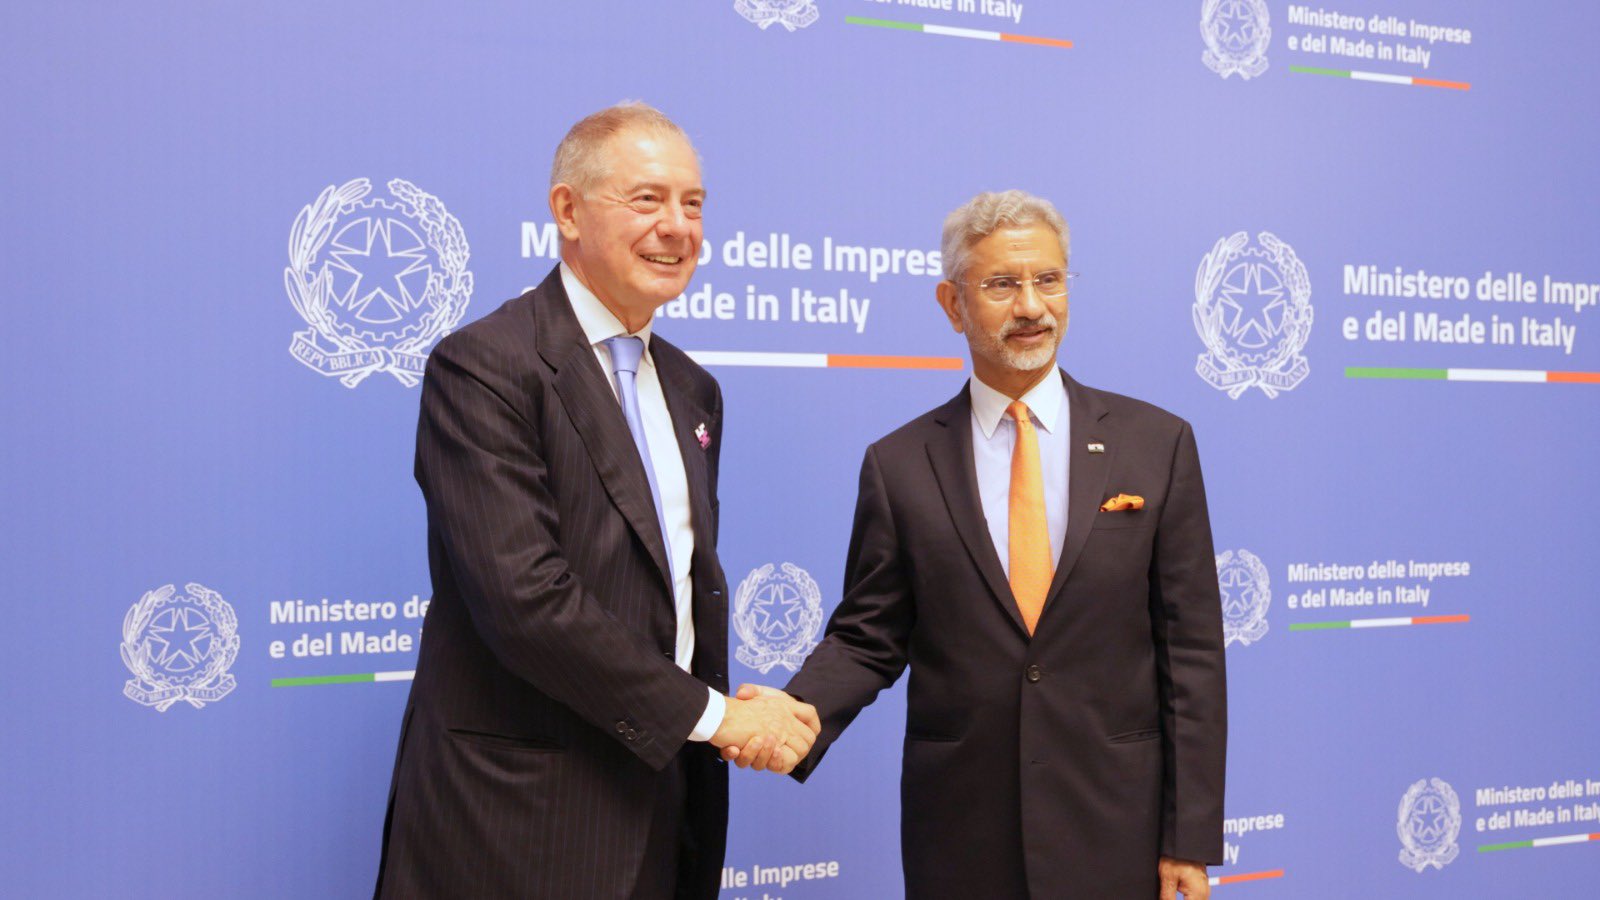 EAM's meeting with Minister of Enterprises & Made in Italy Adolfo Urso